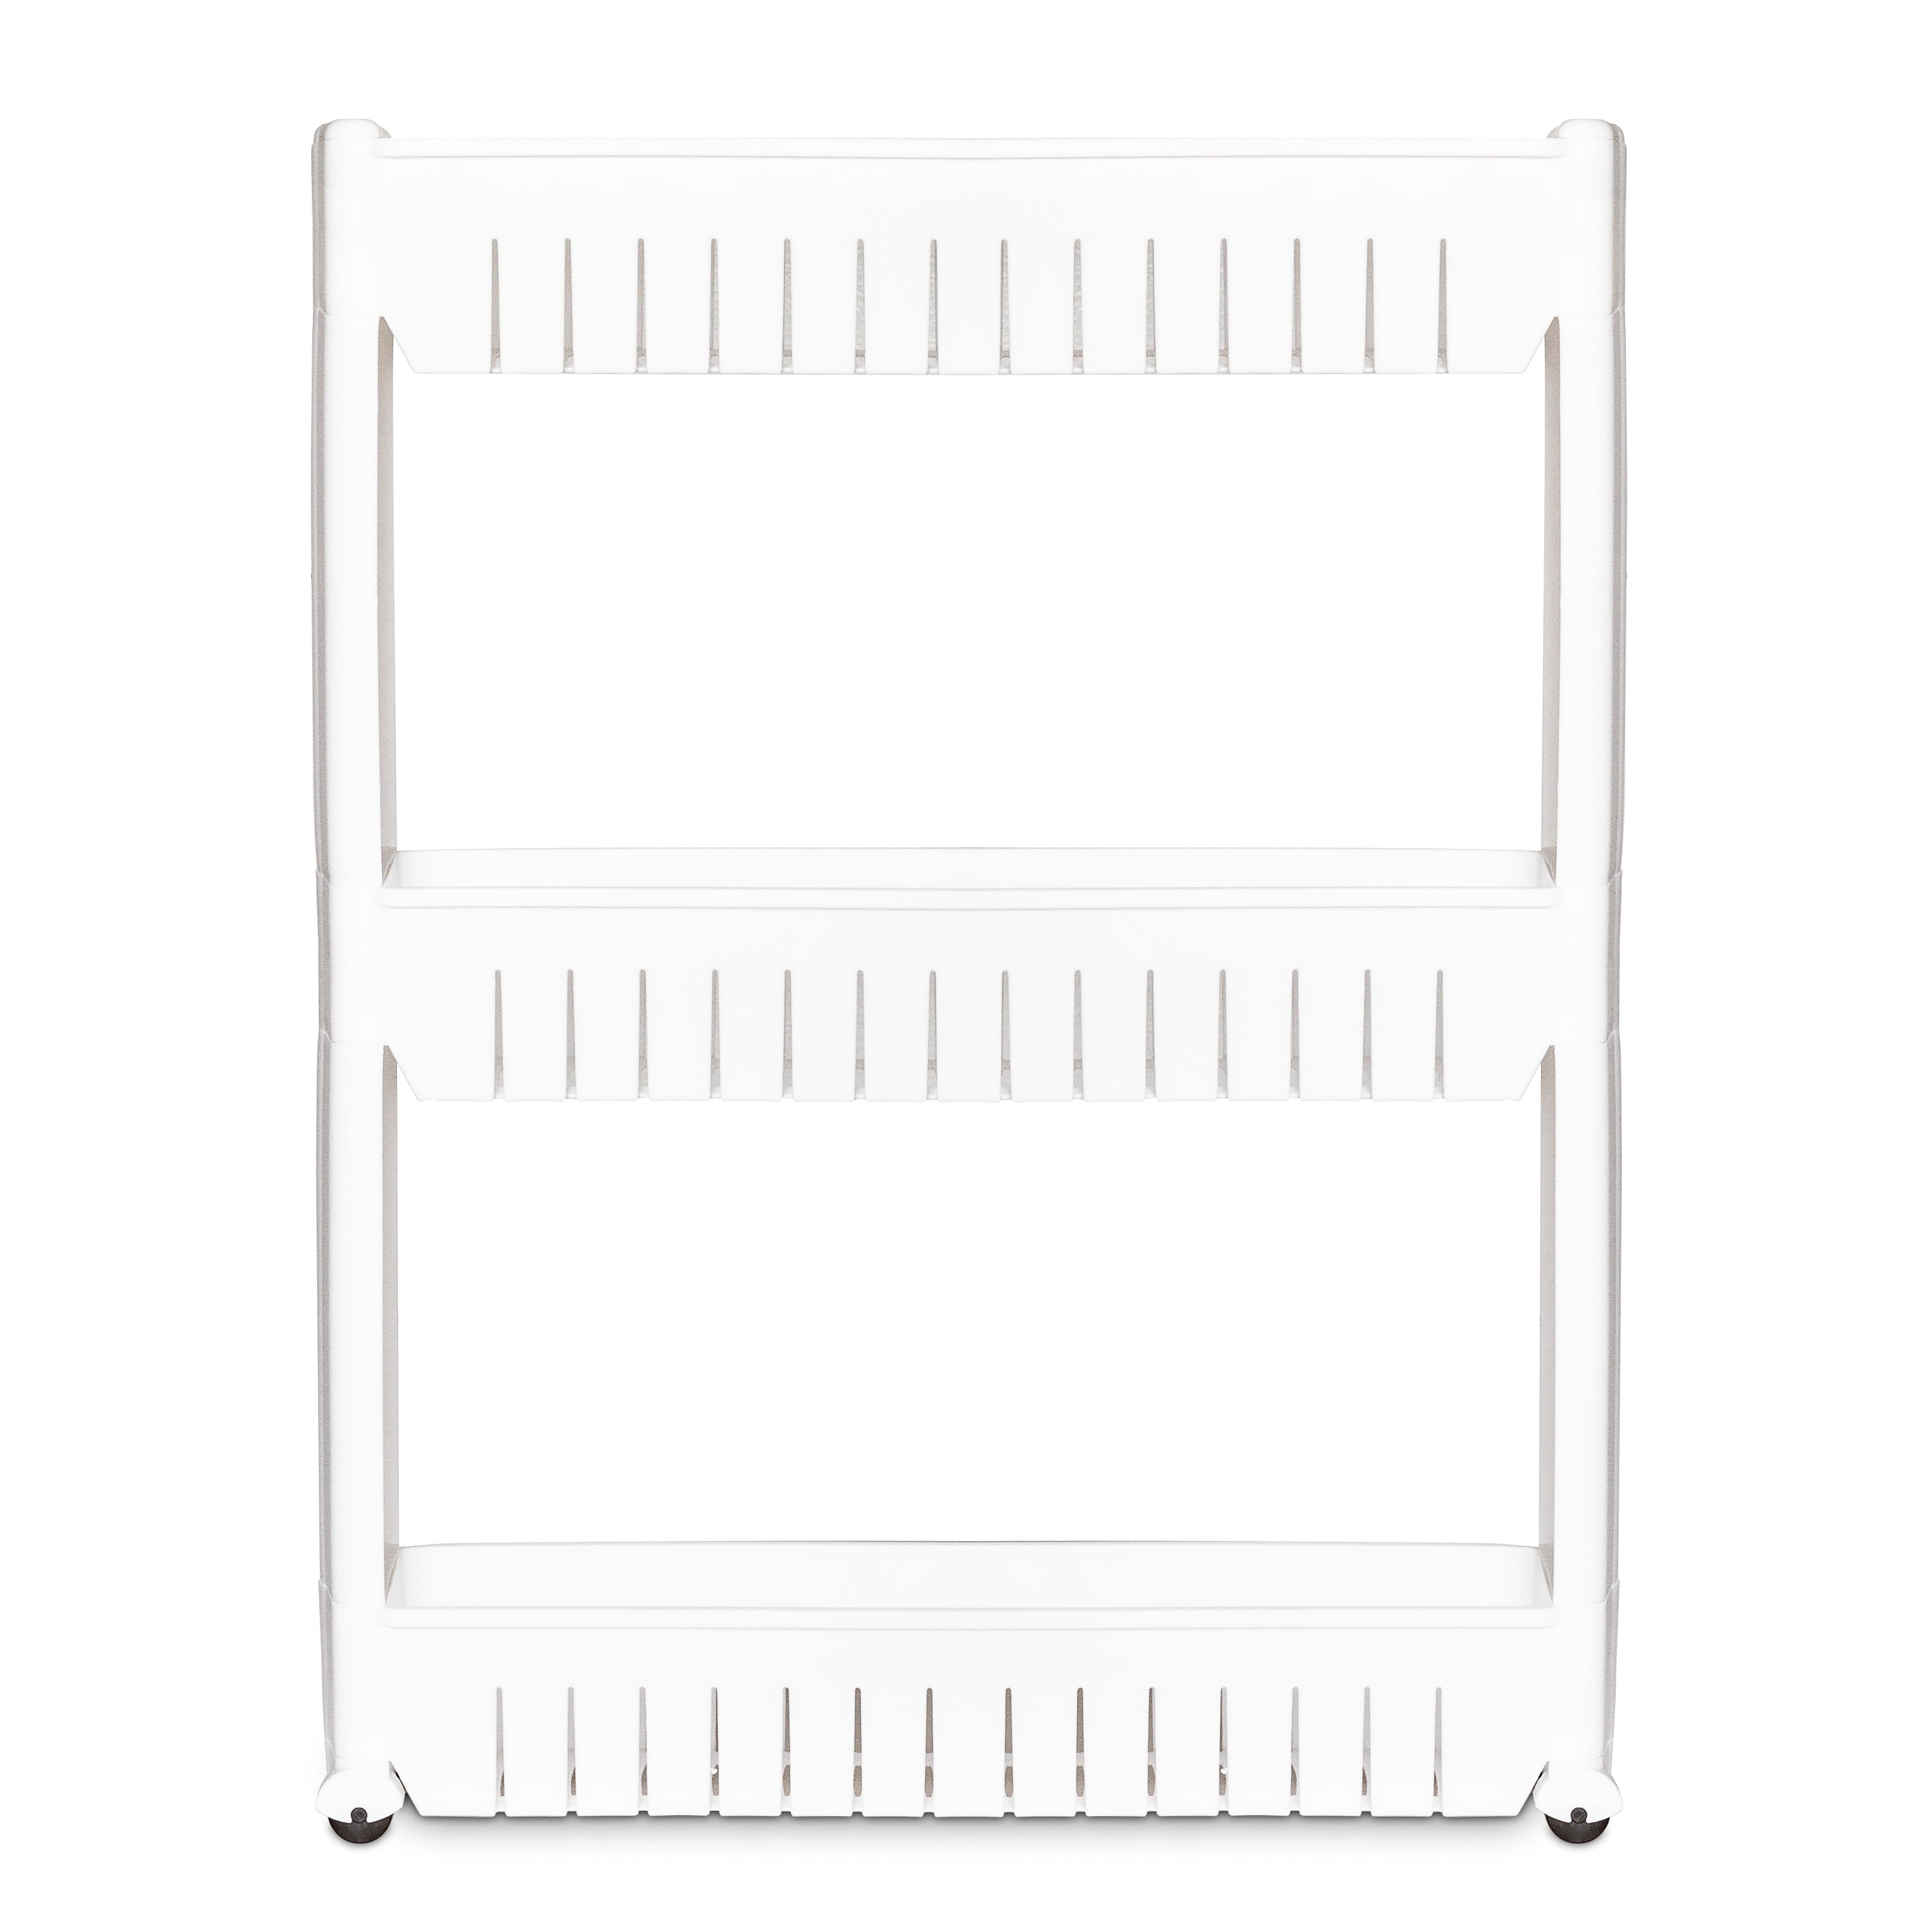 Imperial Home 3-Tier Shelf Rolling Storage Cart - White